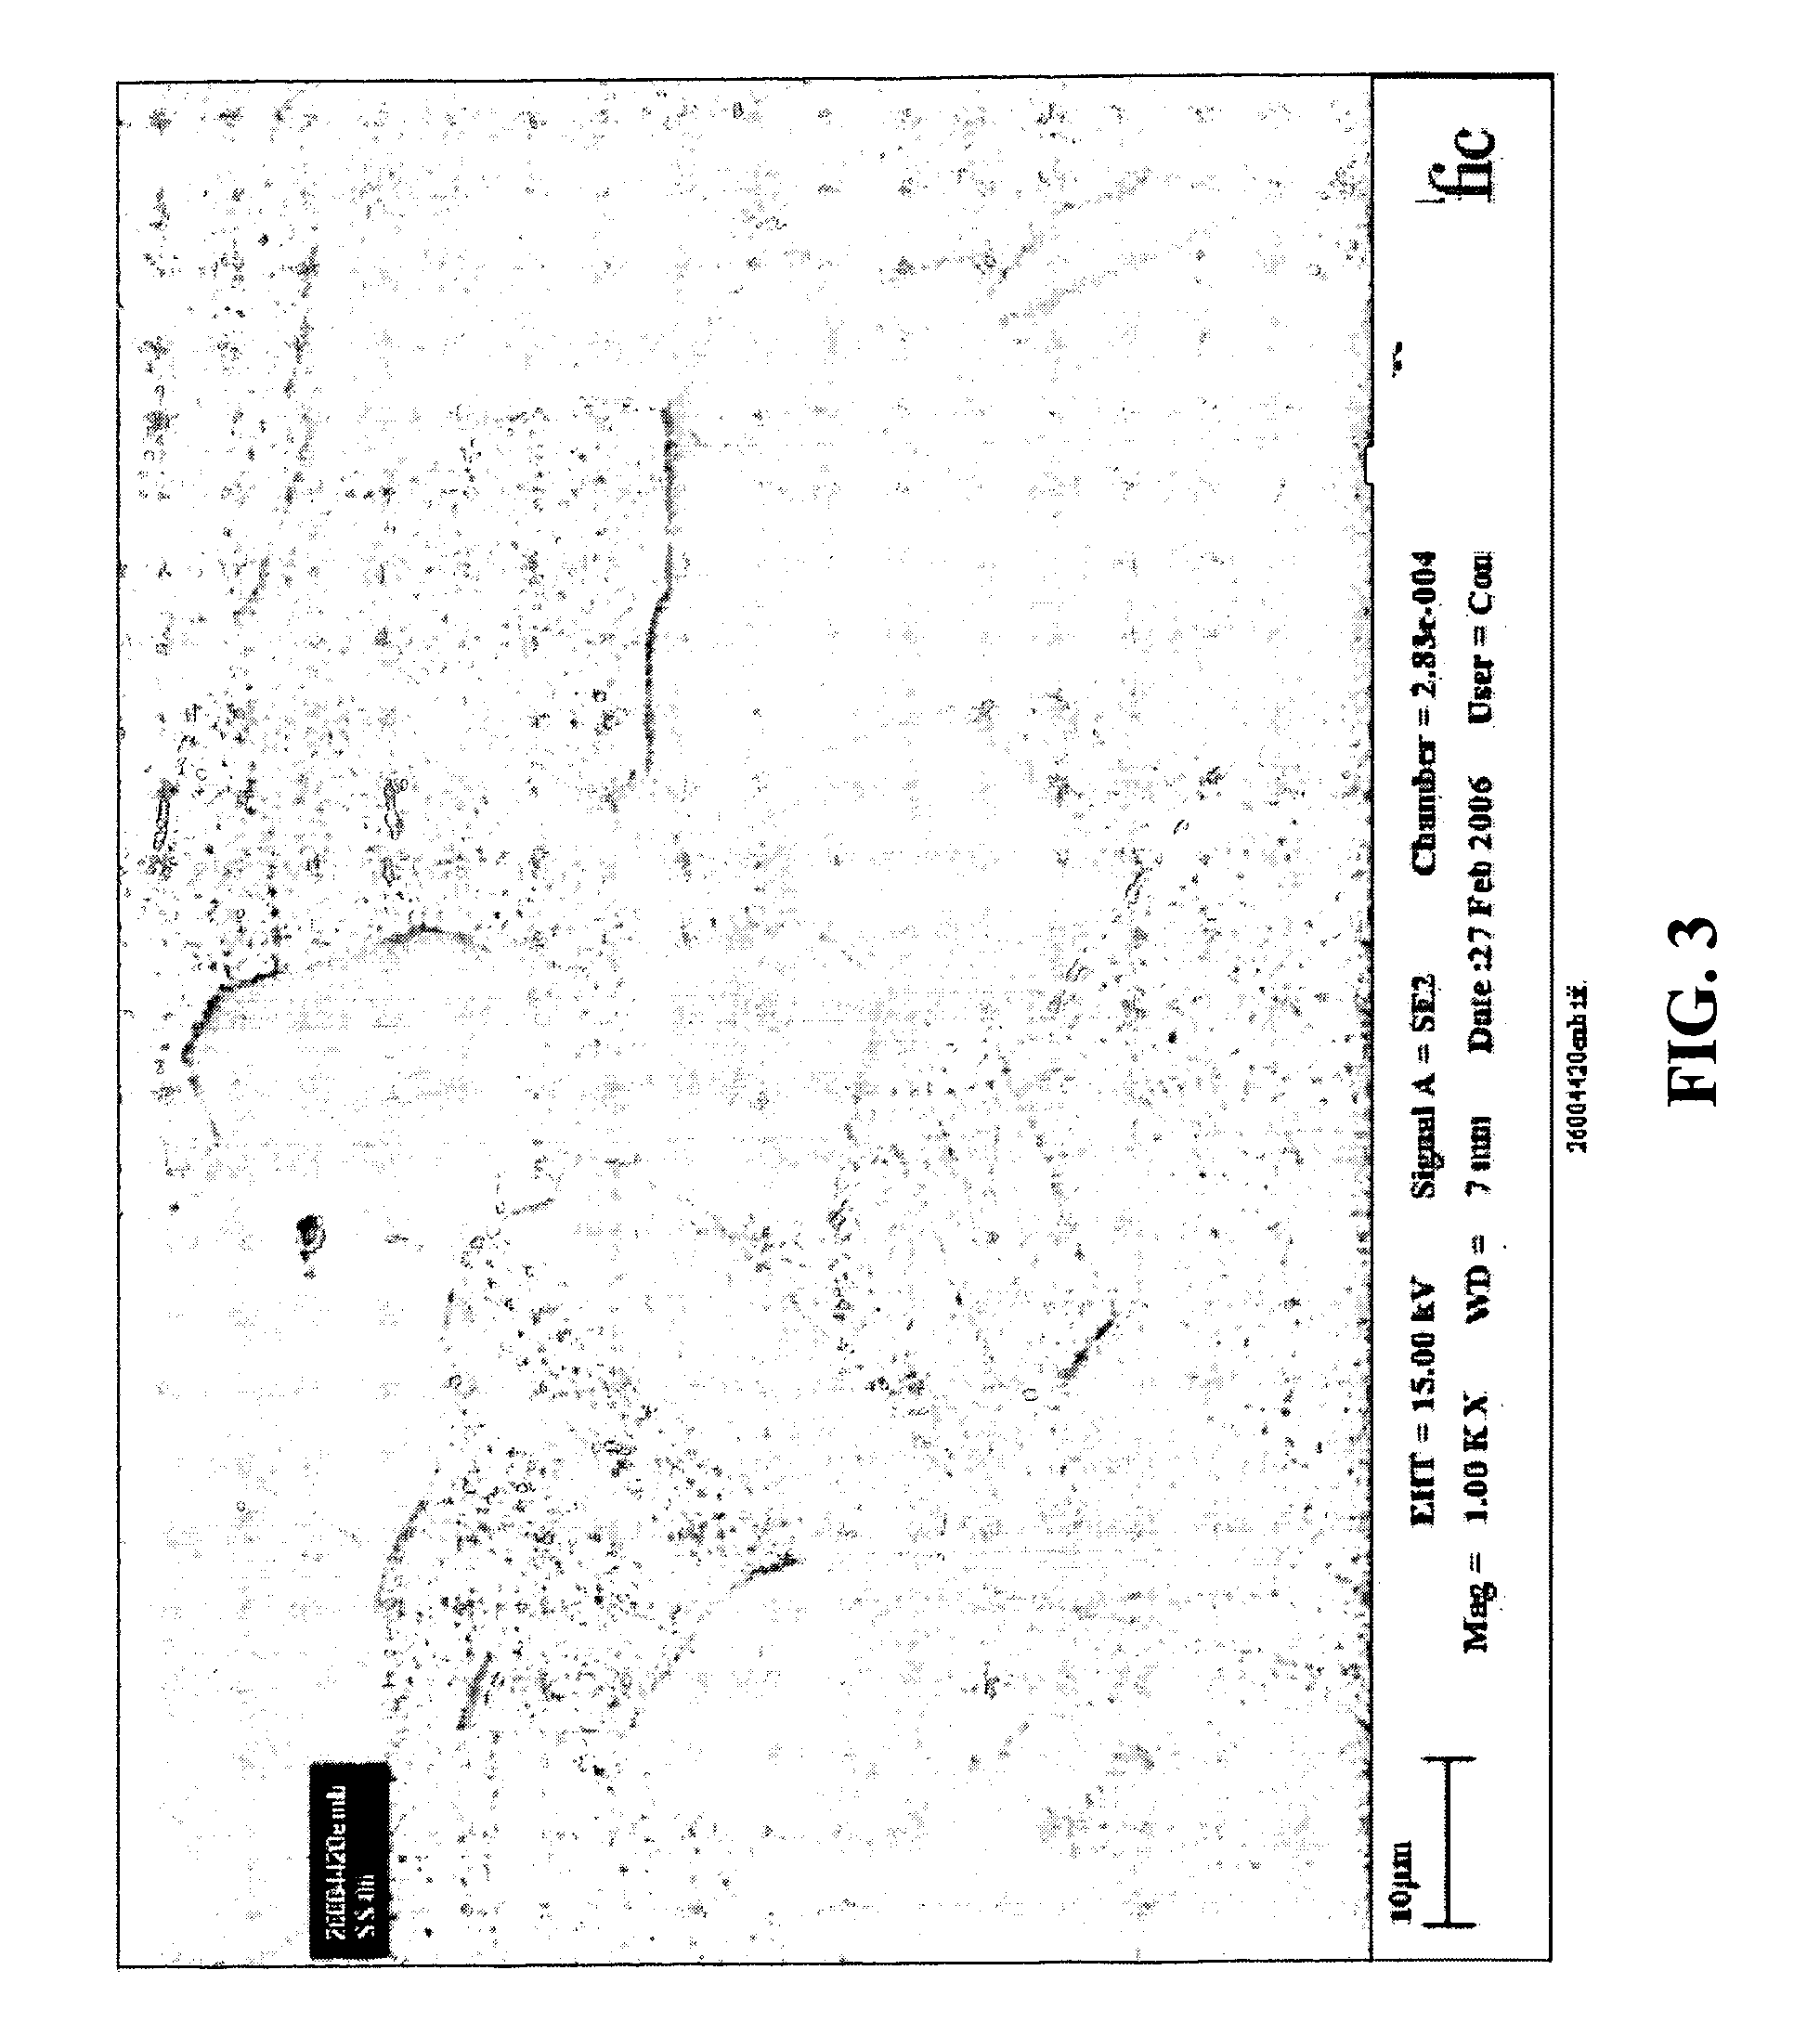 Coating for medical devices comprising an inorganic or ceramic oxide and a therapeutic agent